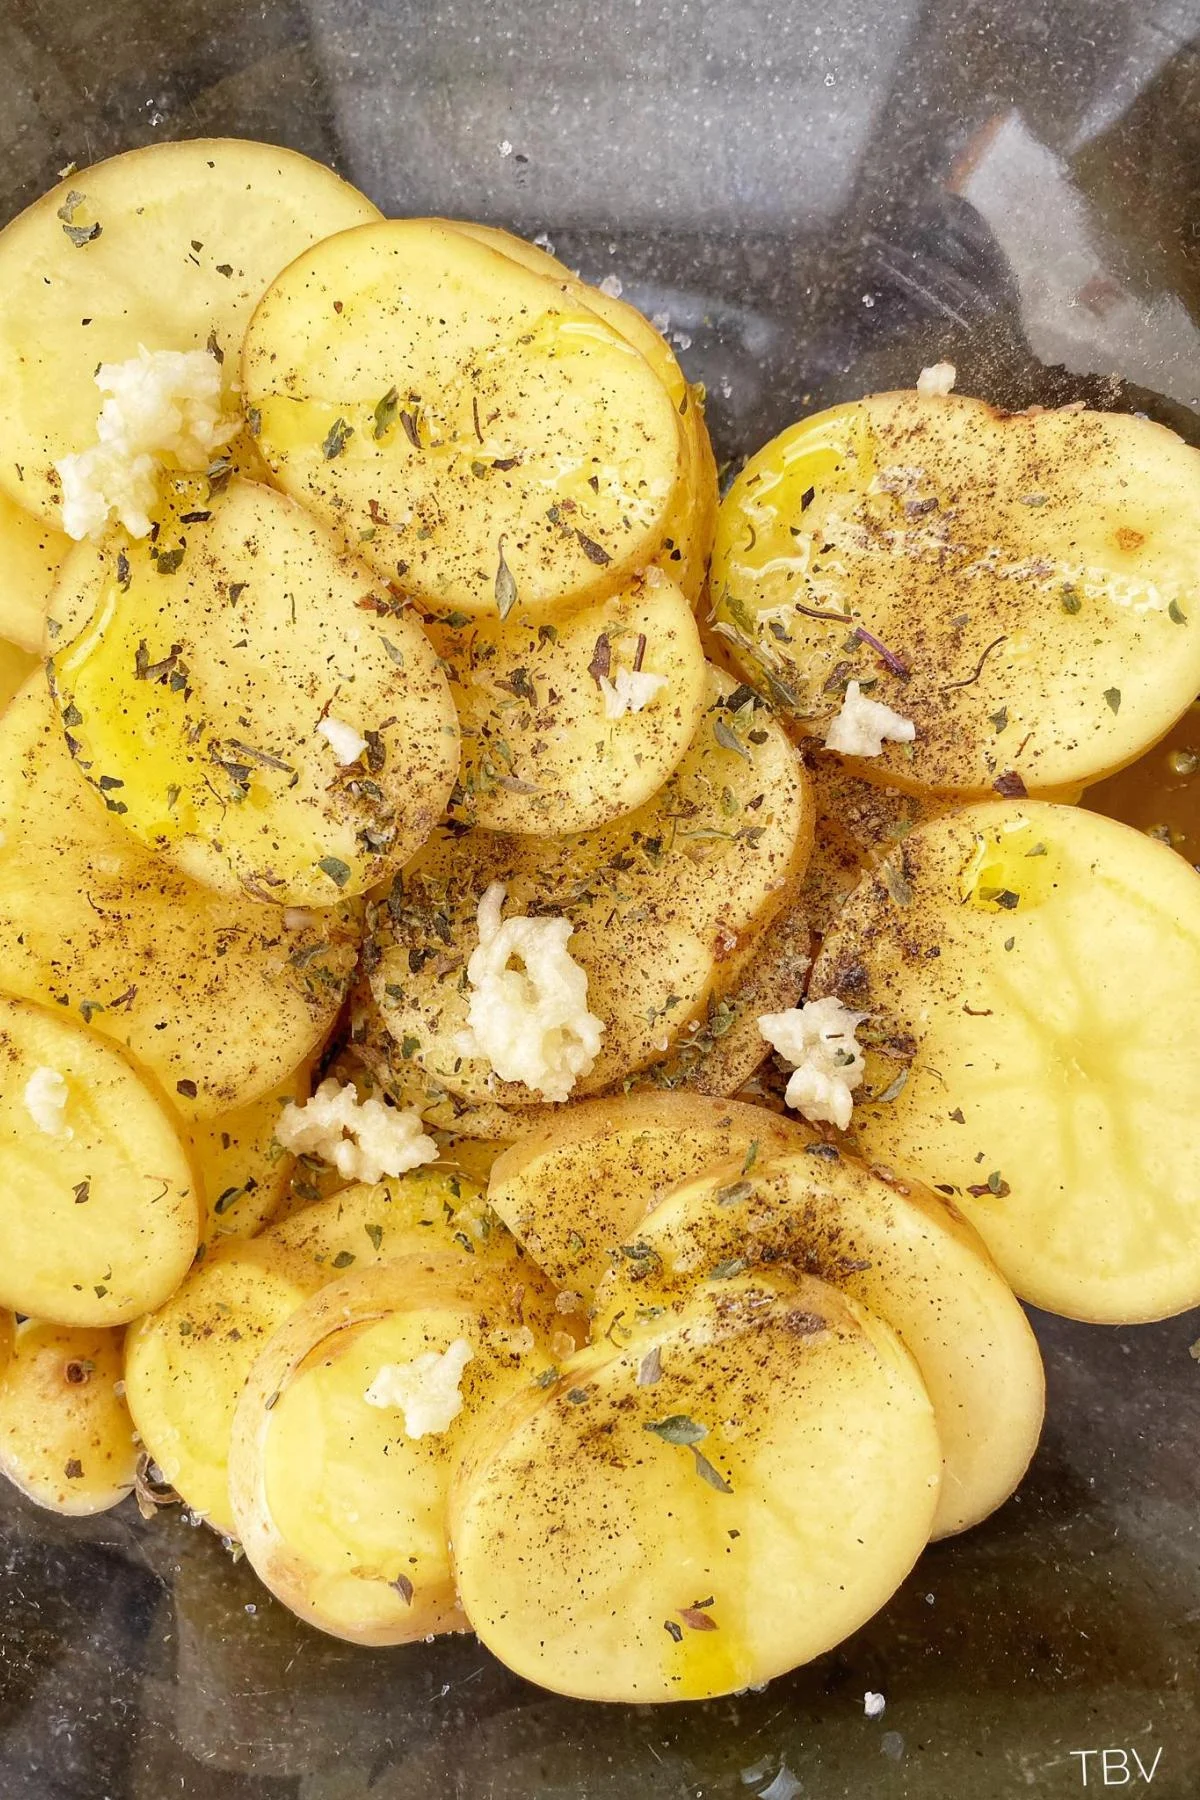 Sliced potatoes seasoned with spices